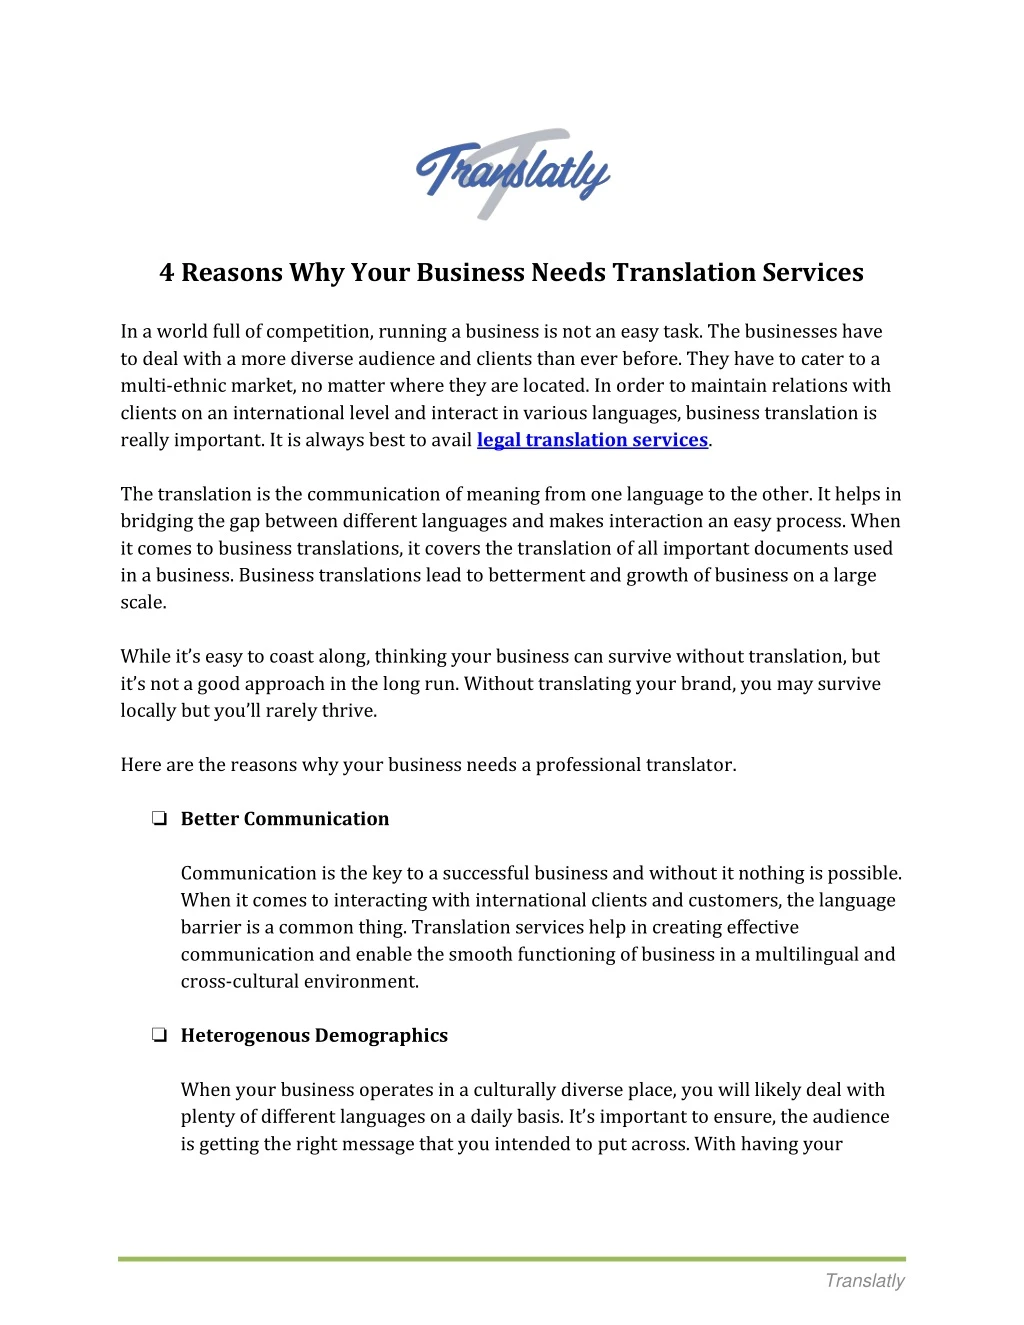 4 reasons why your business needs translation